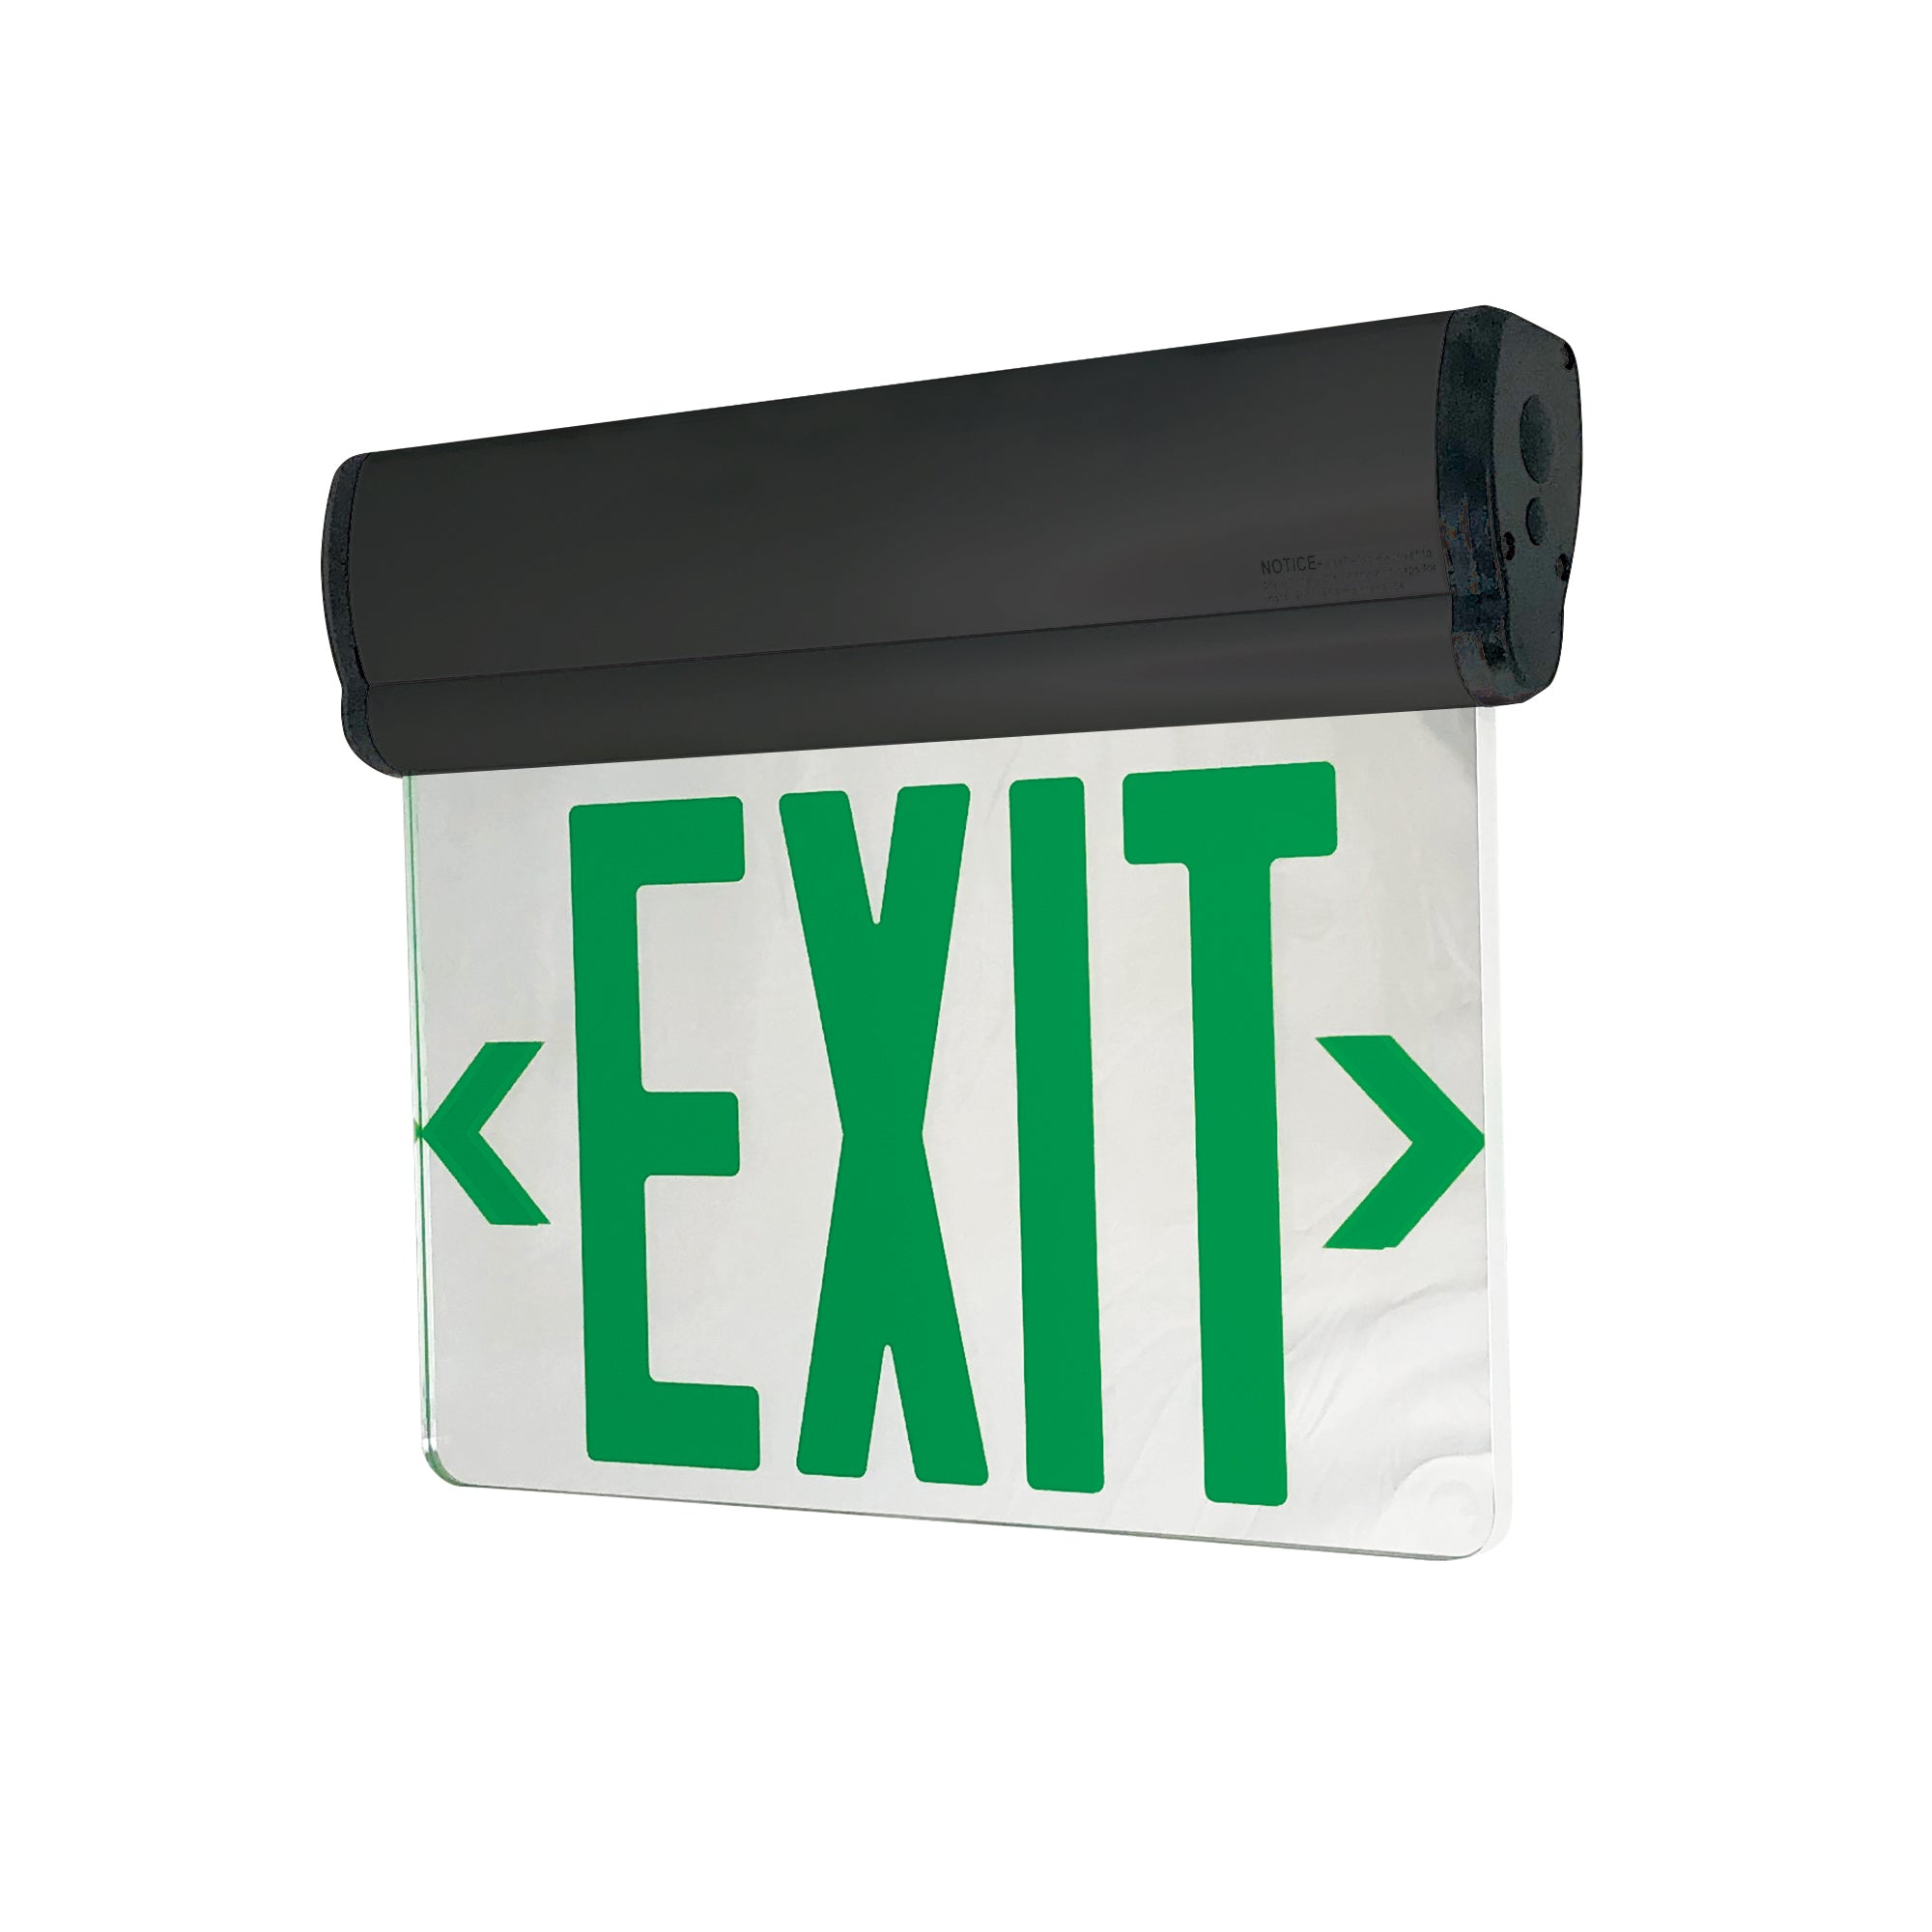 Nora Lighting NX-812-LEDG2MB - Exit / Emergency - Surface Adjustable LED Edge-Lit Exit Sign, Battery Backup, 6 Inch Green Letters, Double Face / Mirrored Acrylic, Black Housing